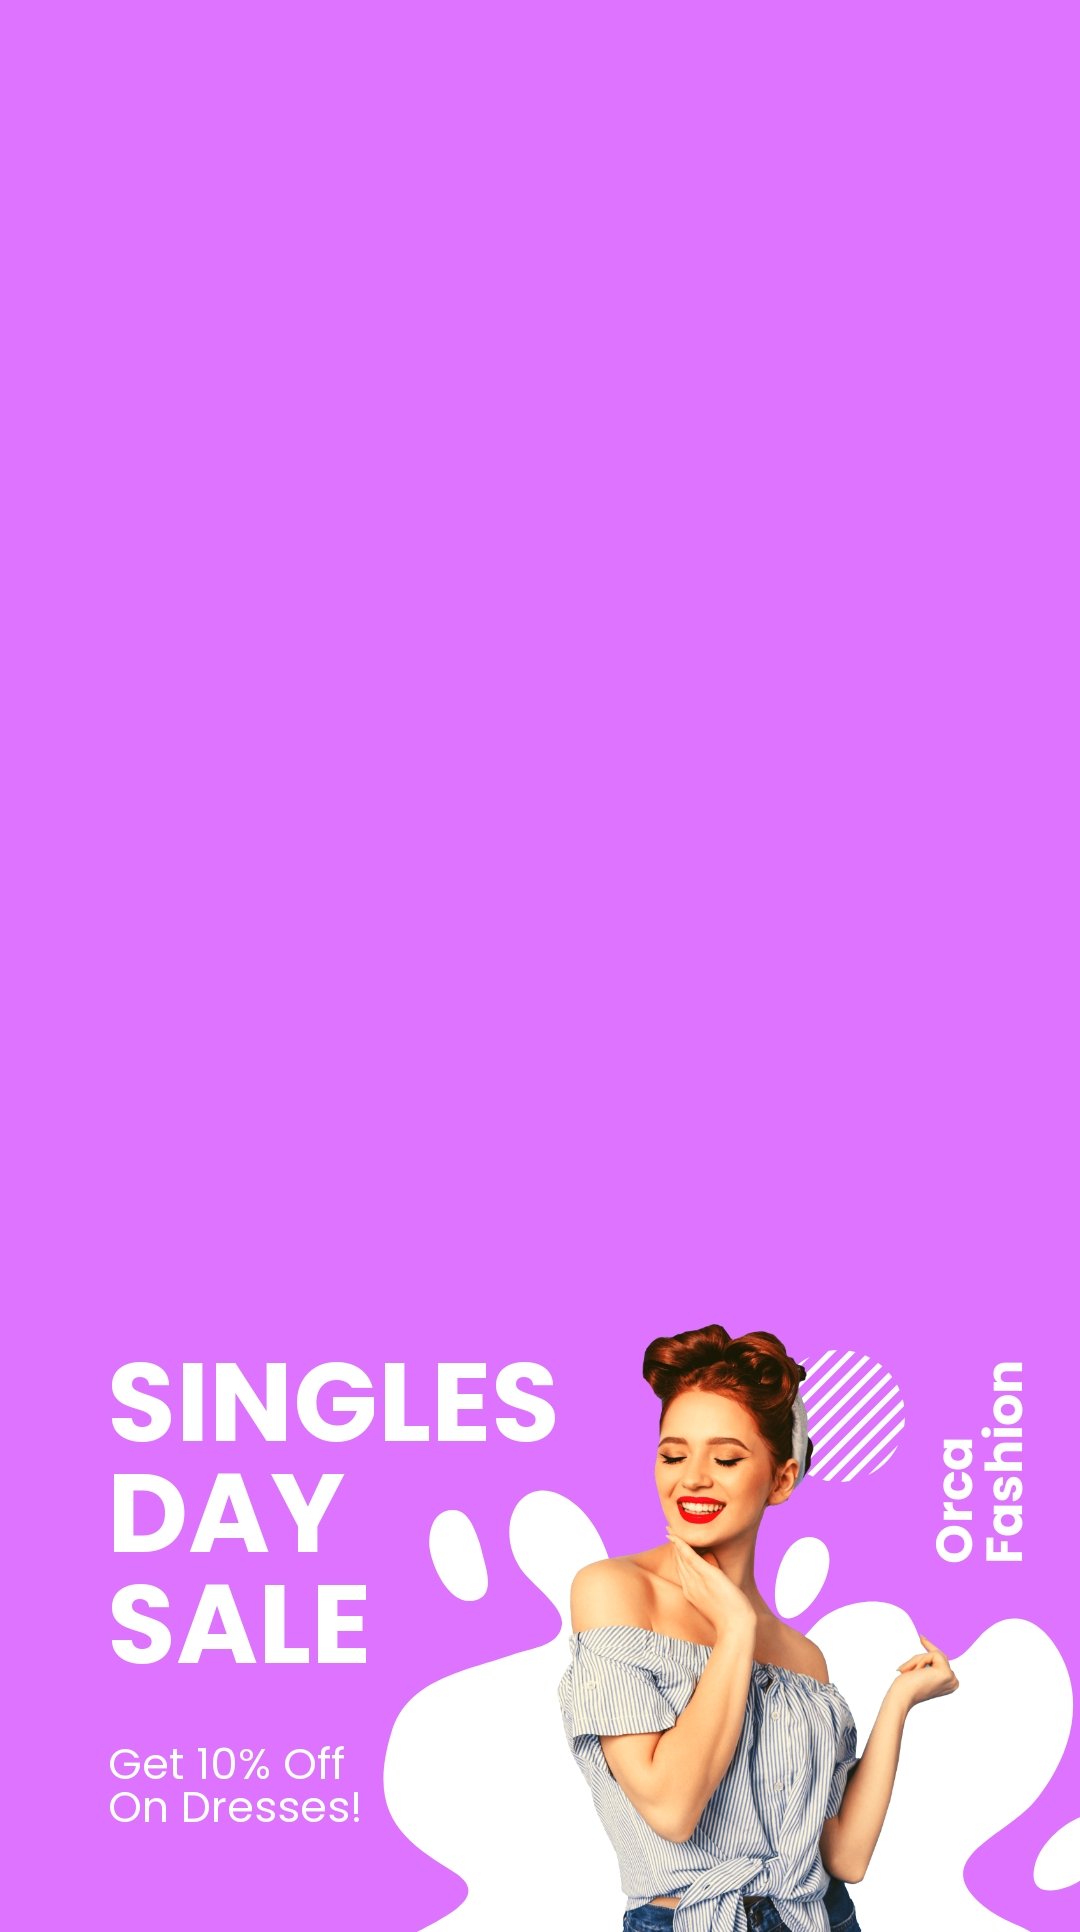 Singles Day Sale Snapchat Geofilter Template